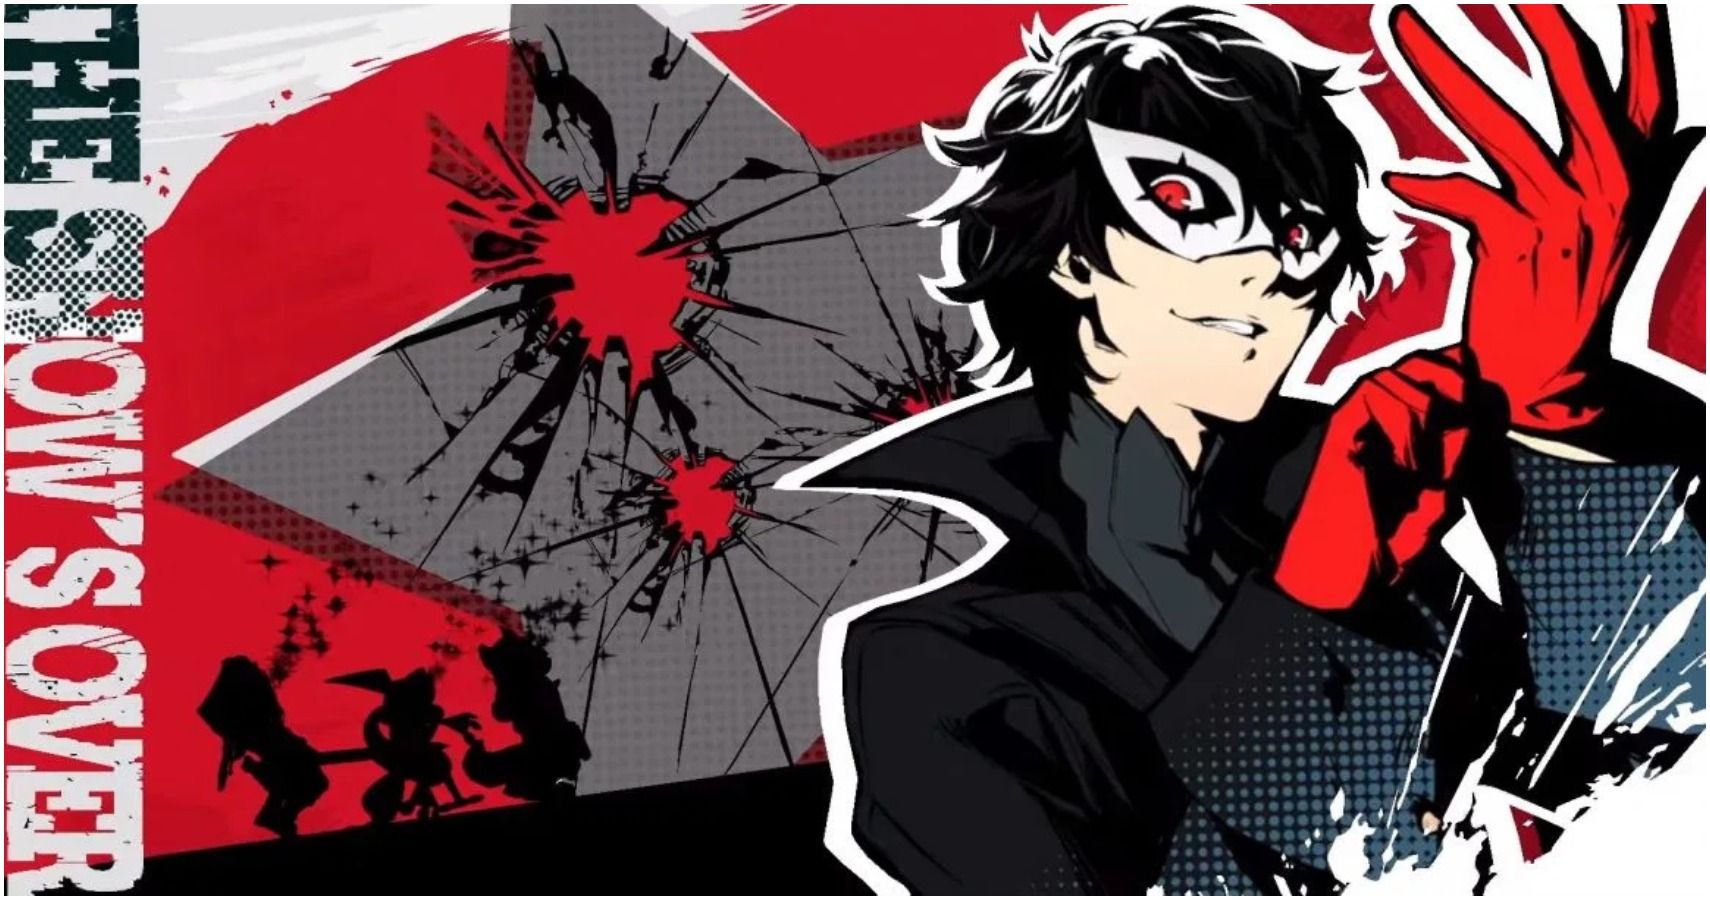 The Phantom Thieves From Persona 5 Should Appear In Tokyo Mirage Sessions #FE Encore